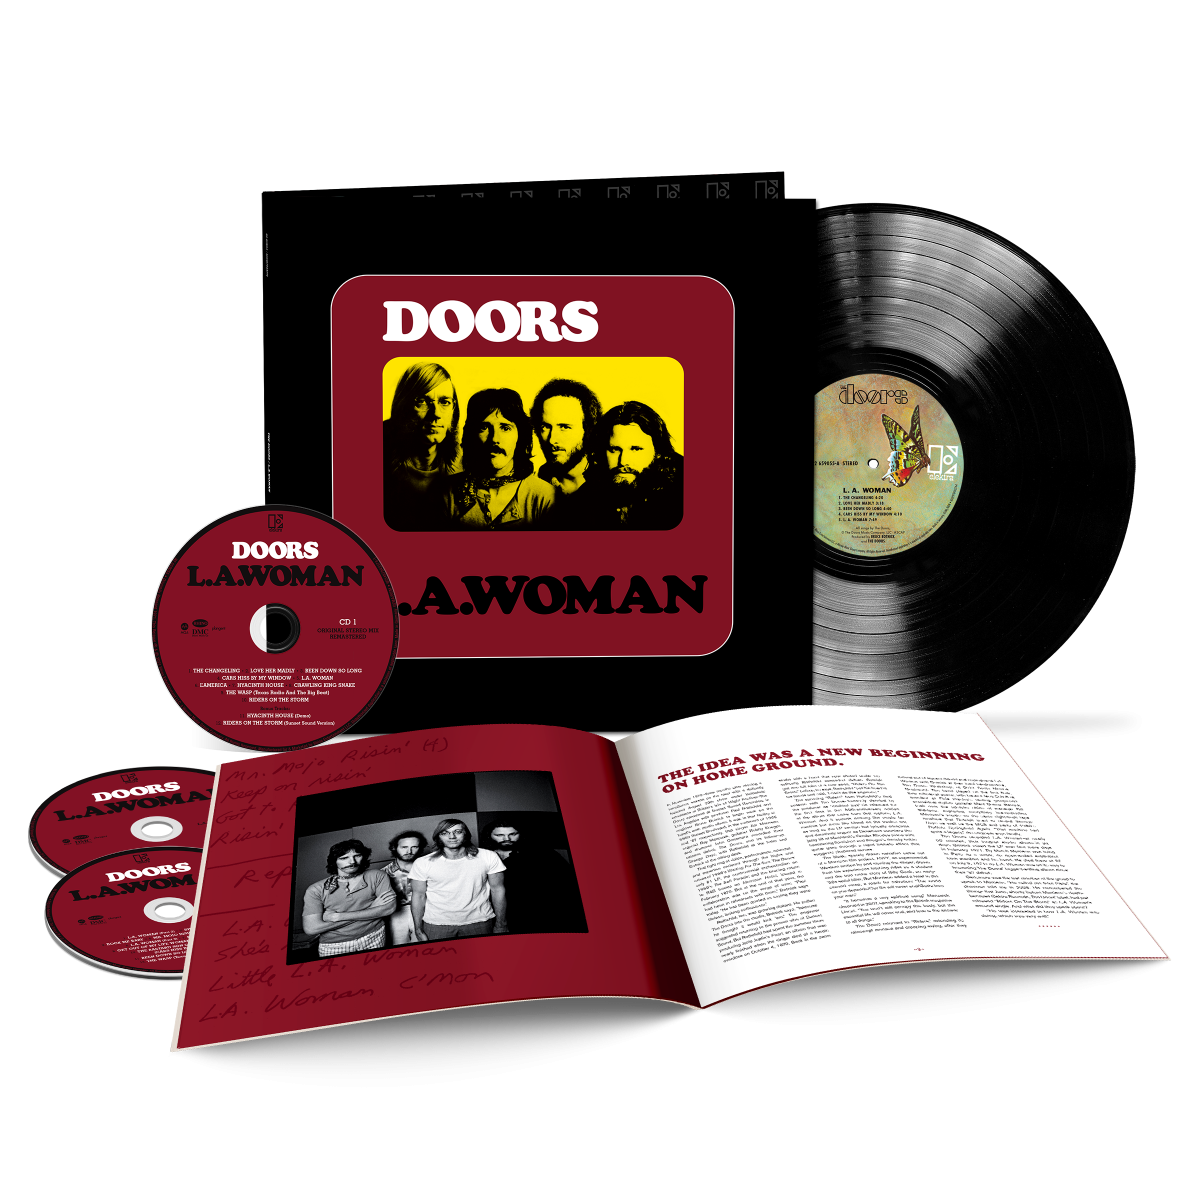 THE DOORS 'L.A. WOMAN' (50TH ANNIVERSARY DELUXE EDITION) LP/CD SET